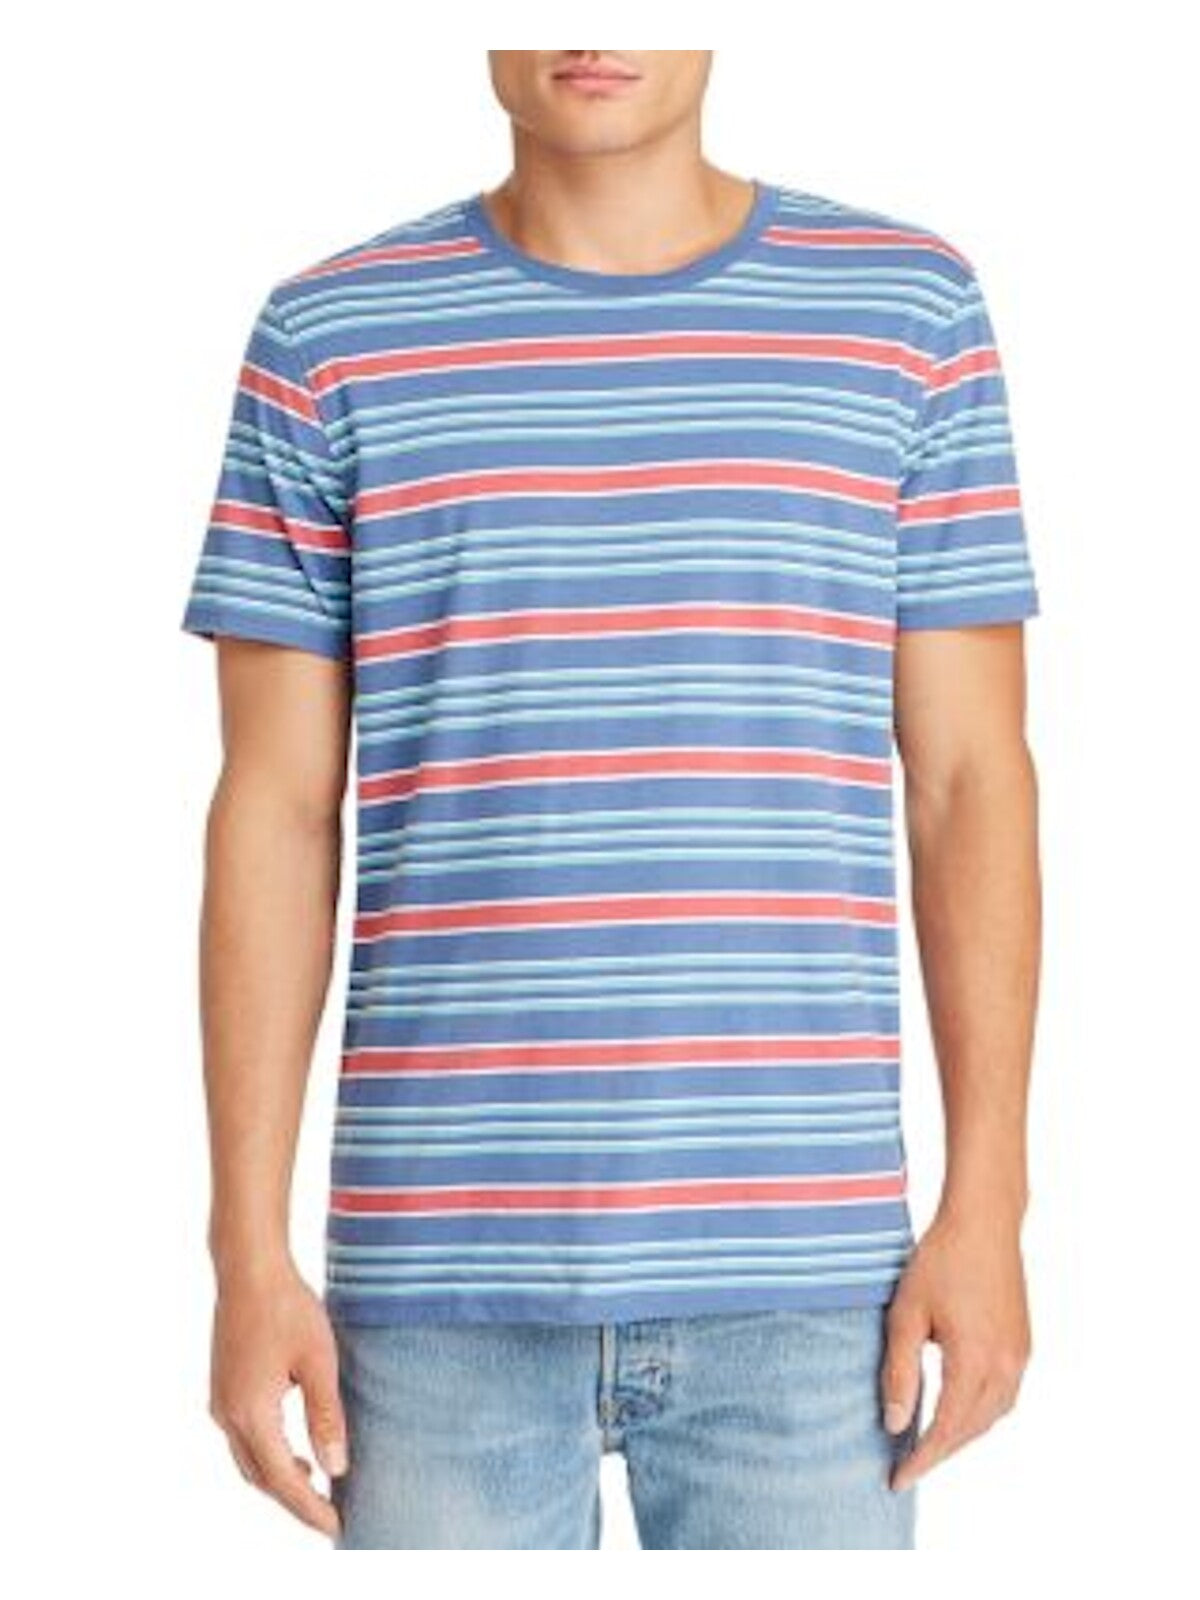 Pacific and Park Mens Blue Lightweight Striped Classic T-Shirt L